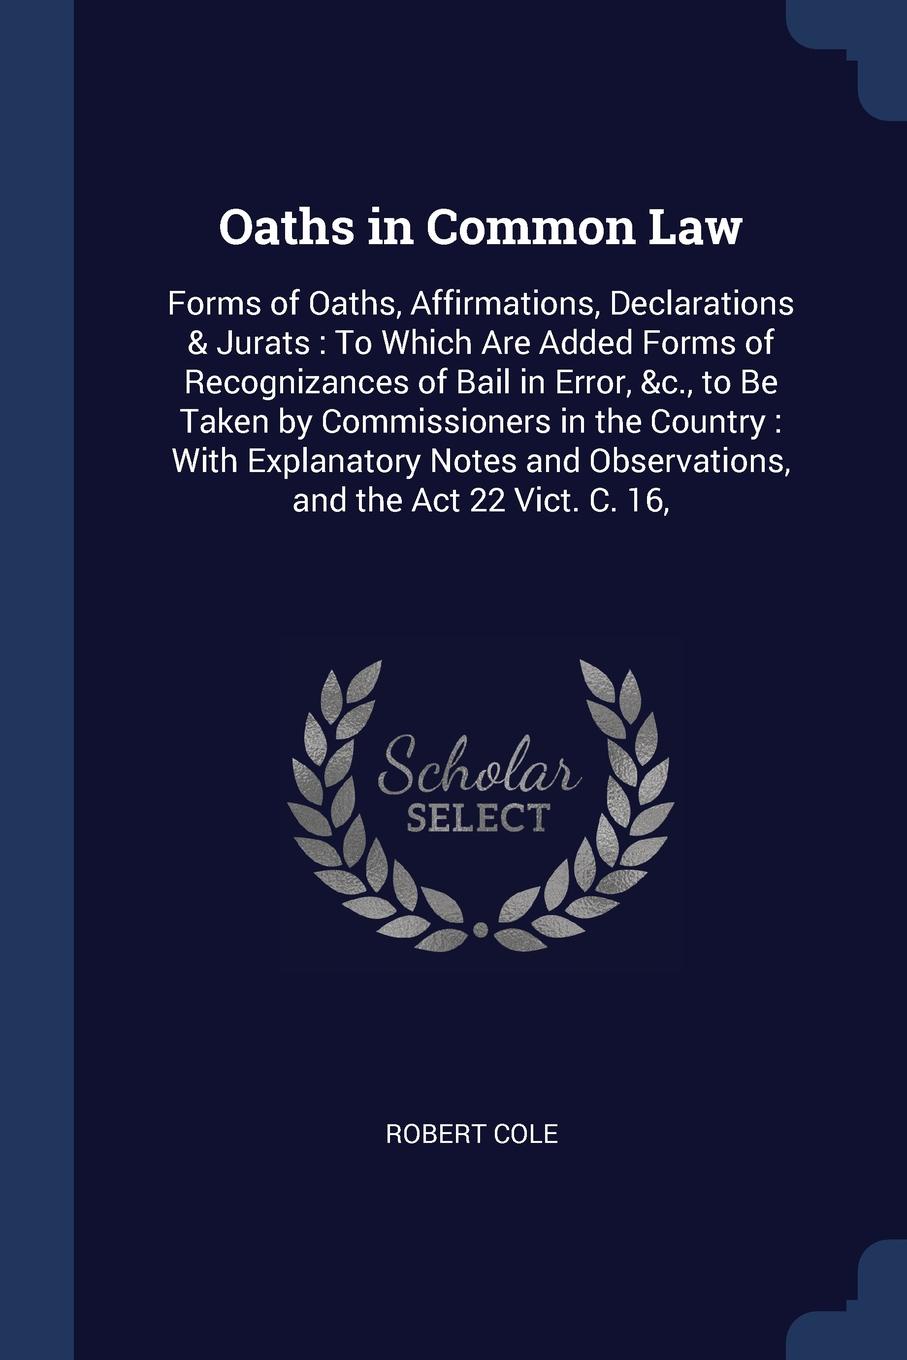 Oaths in Common Law. Forms of Oaths, Affirmations, Declarations & Jurats : To Which Are Added Forms of Recognizances of Bail in Error, &c., to Be Taken by Commissioners in the Country : With Explanatory Notes and Observations, and the Act 22 Vict....